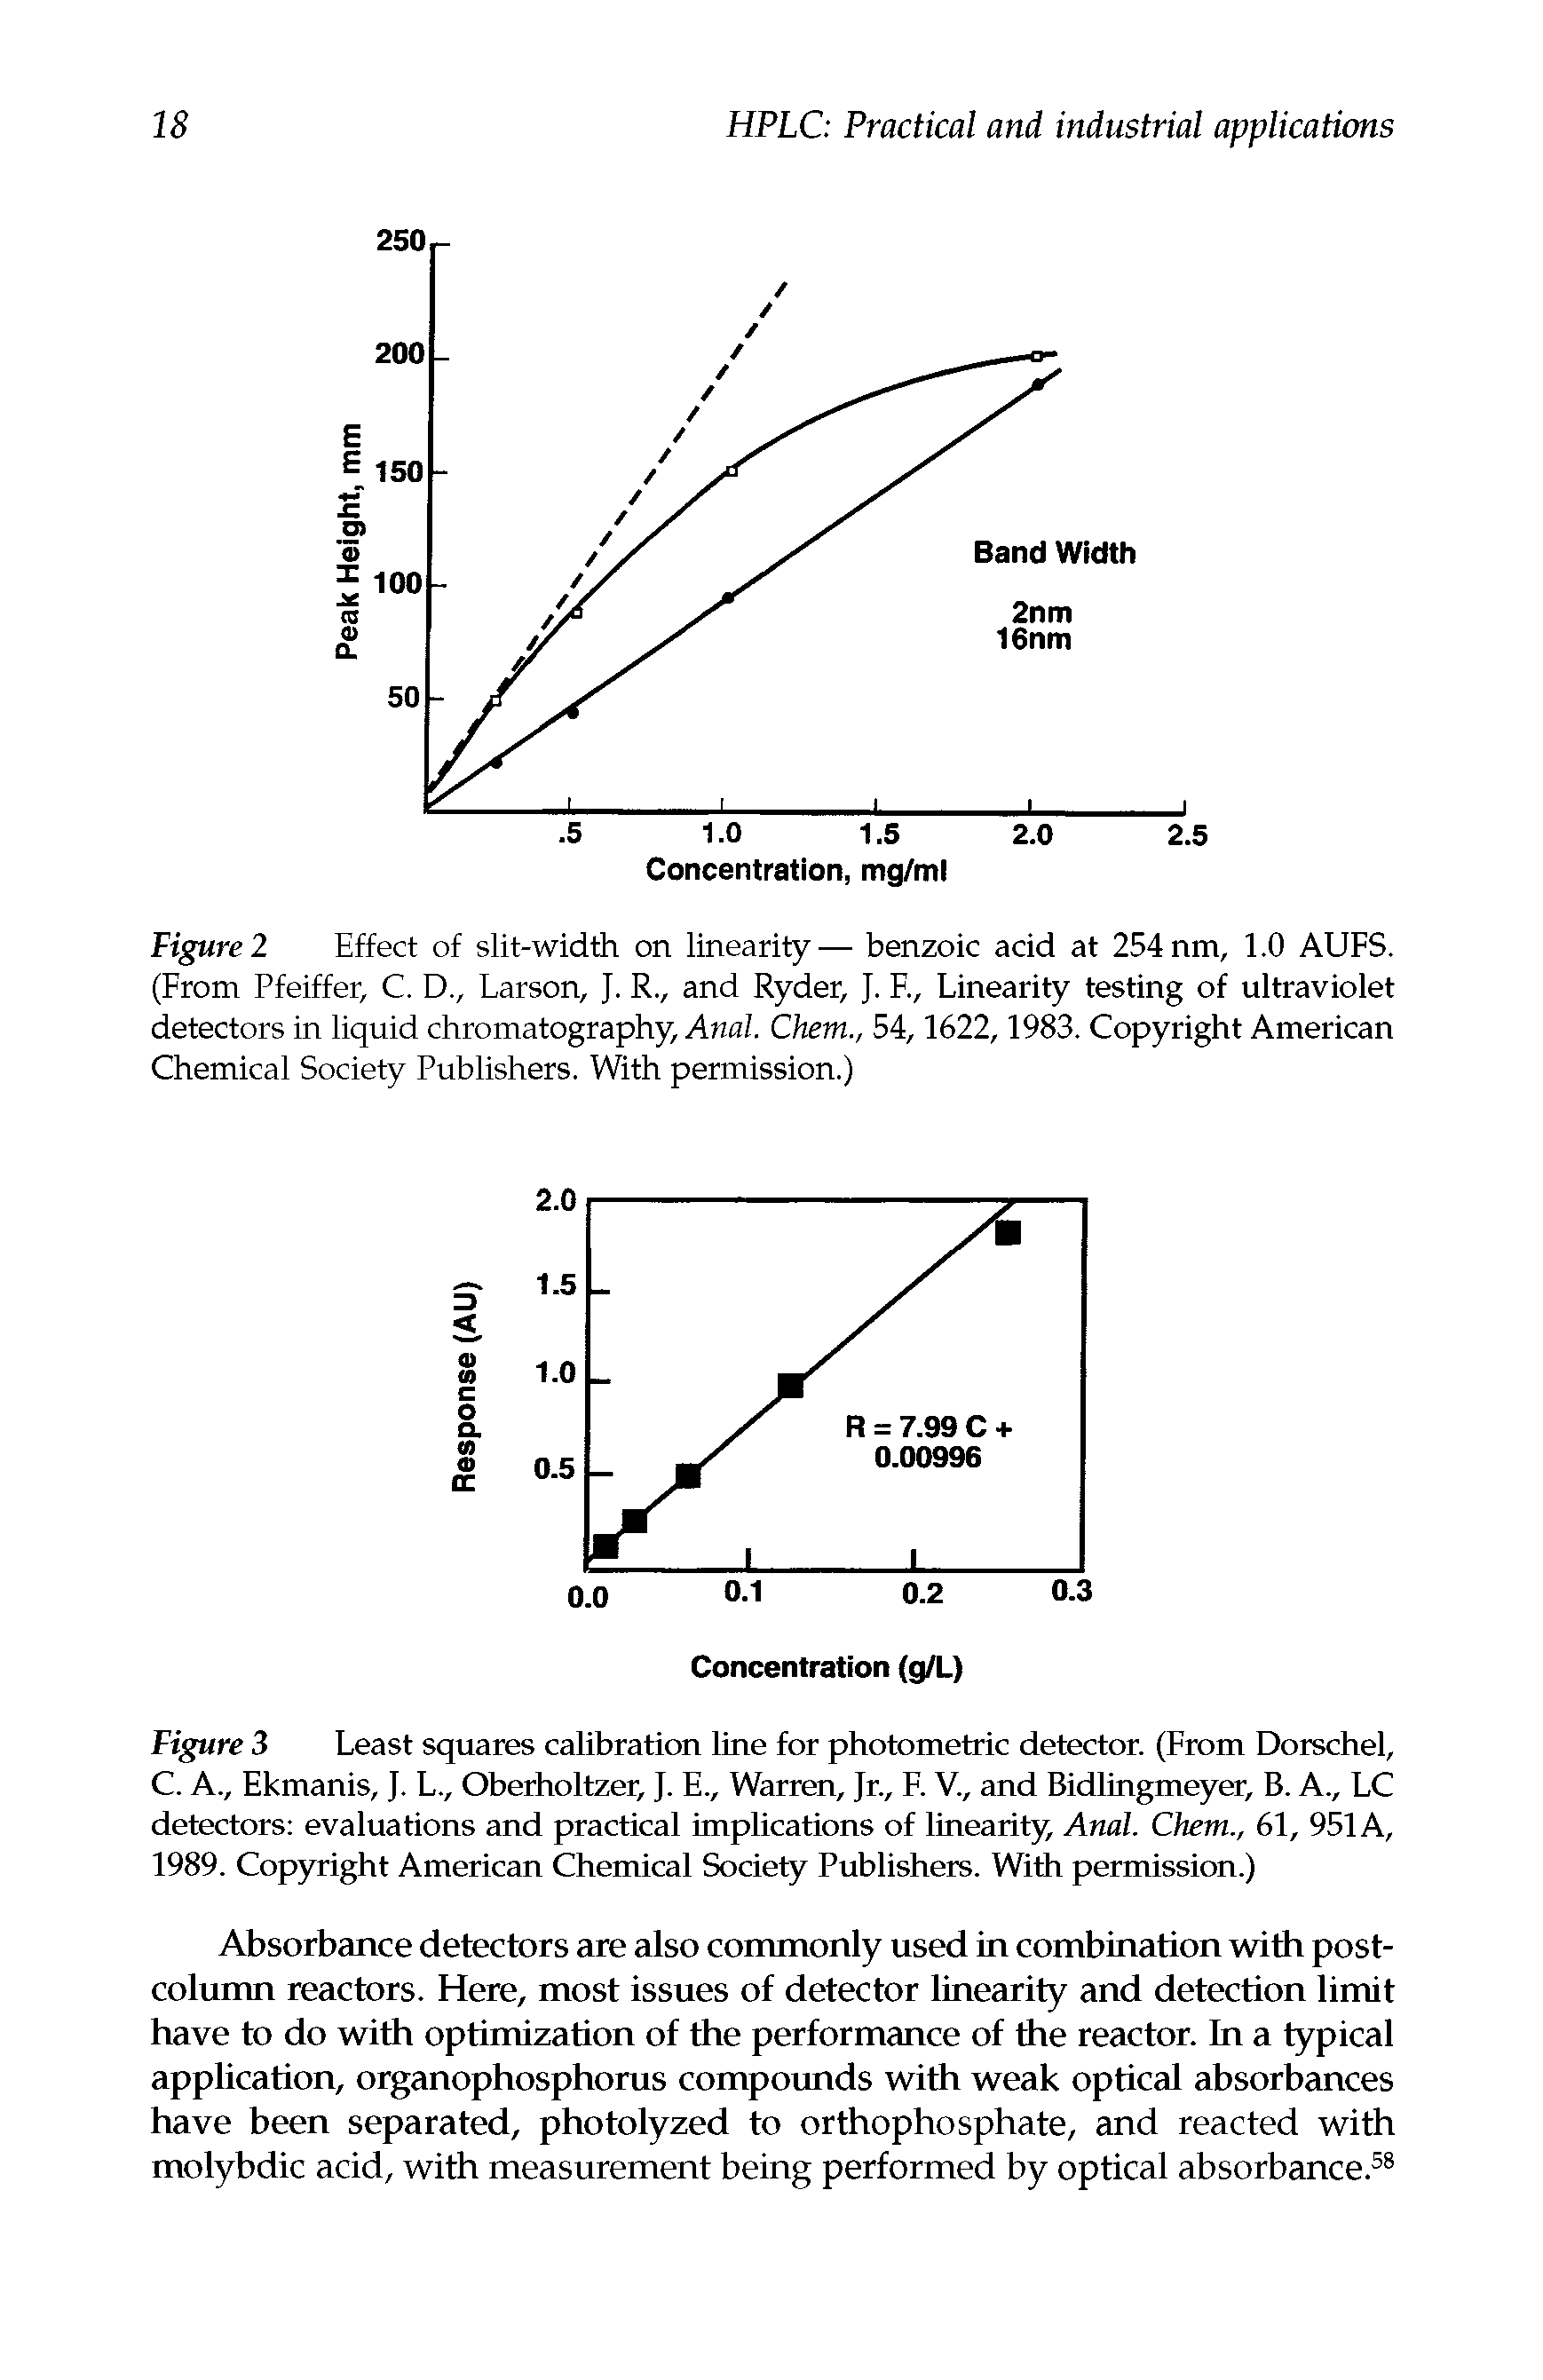 Figure 2 Effect of slit-width on linearity— benzoic acid at 254 nm, 1.0 AUFS. (From Pfeiffer, C. D., Larson, J. R., and Ryder, J. F., Linearity testing of ultraviolet detectors in liquid chromatography, Anal. Chem., 54,1622,1983. Copyright American Chemical Society Publishers. With permission.)...